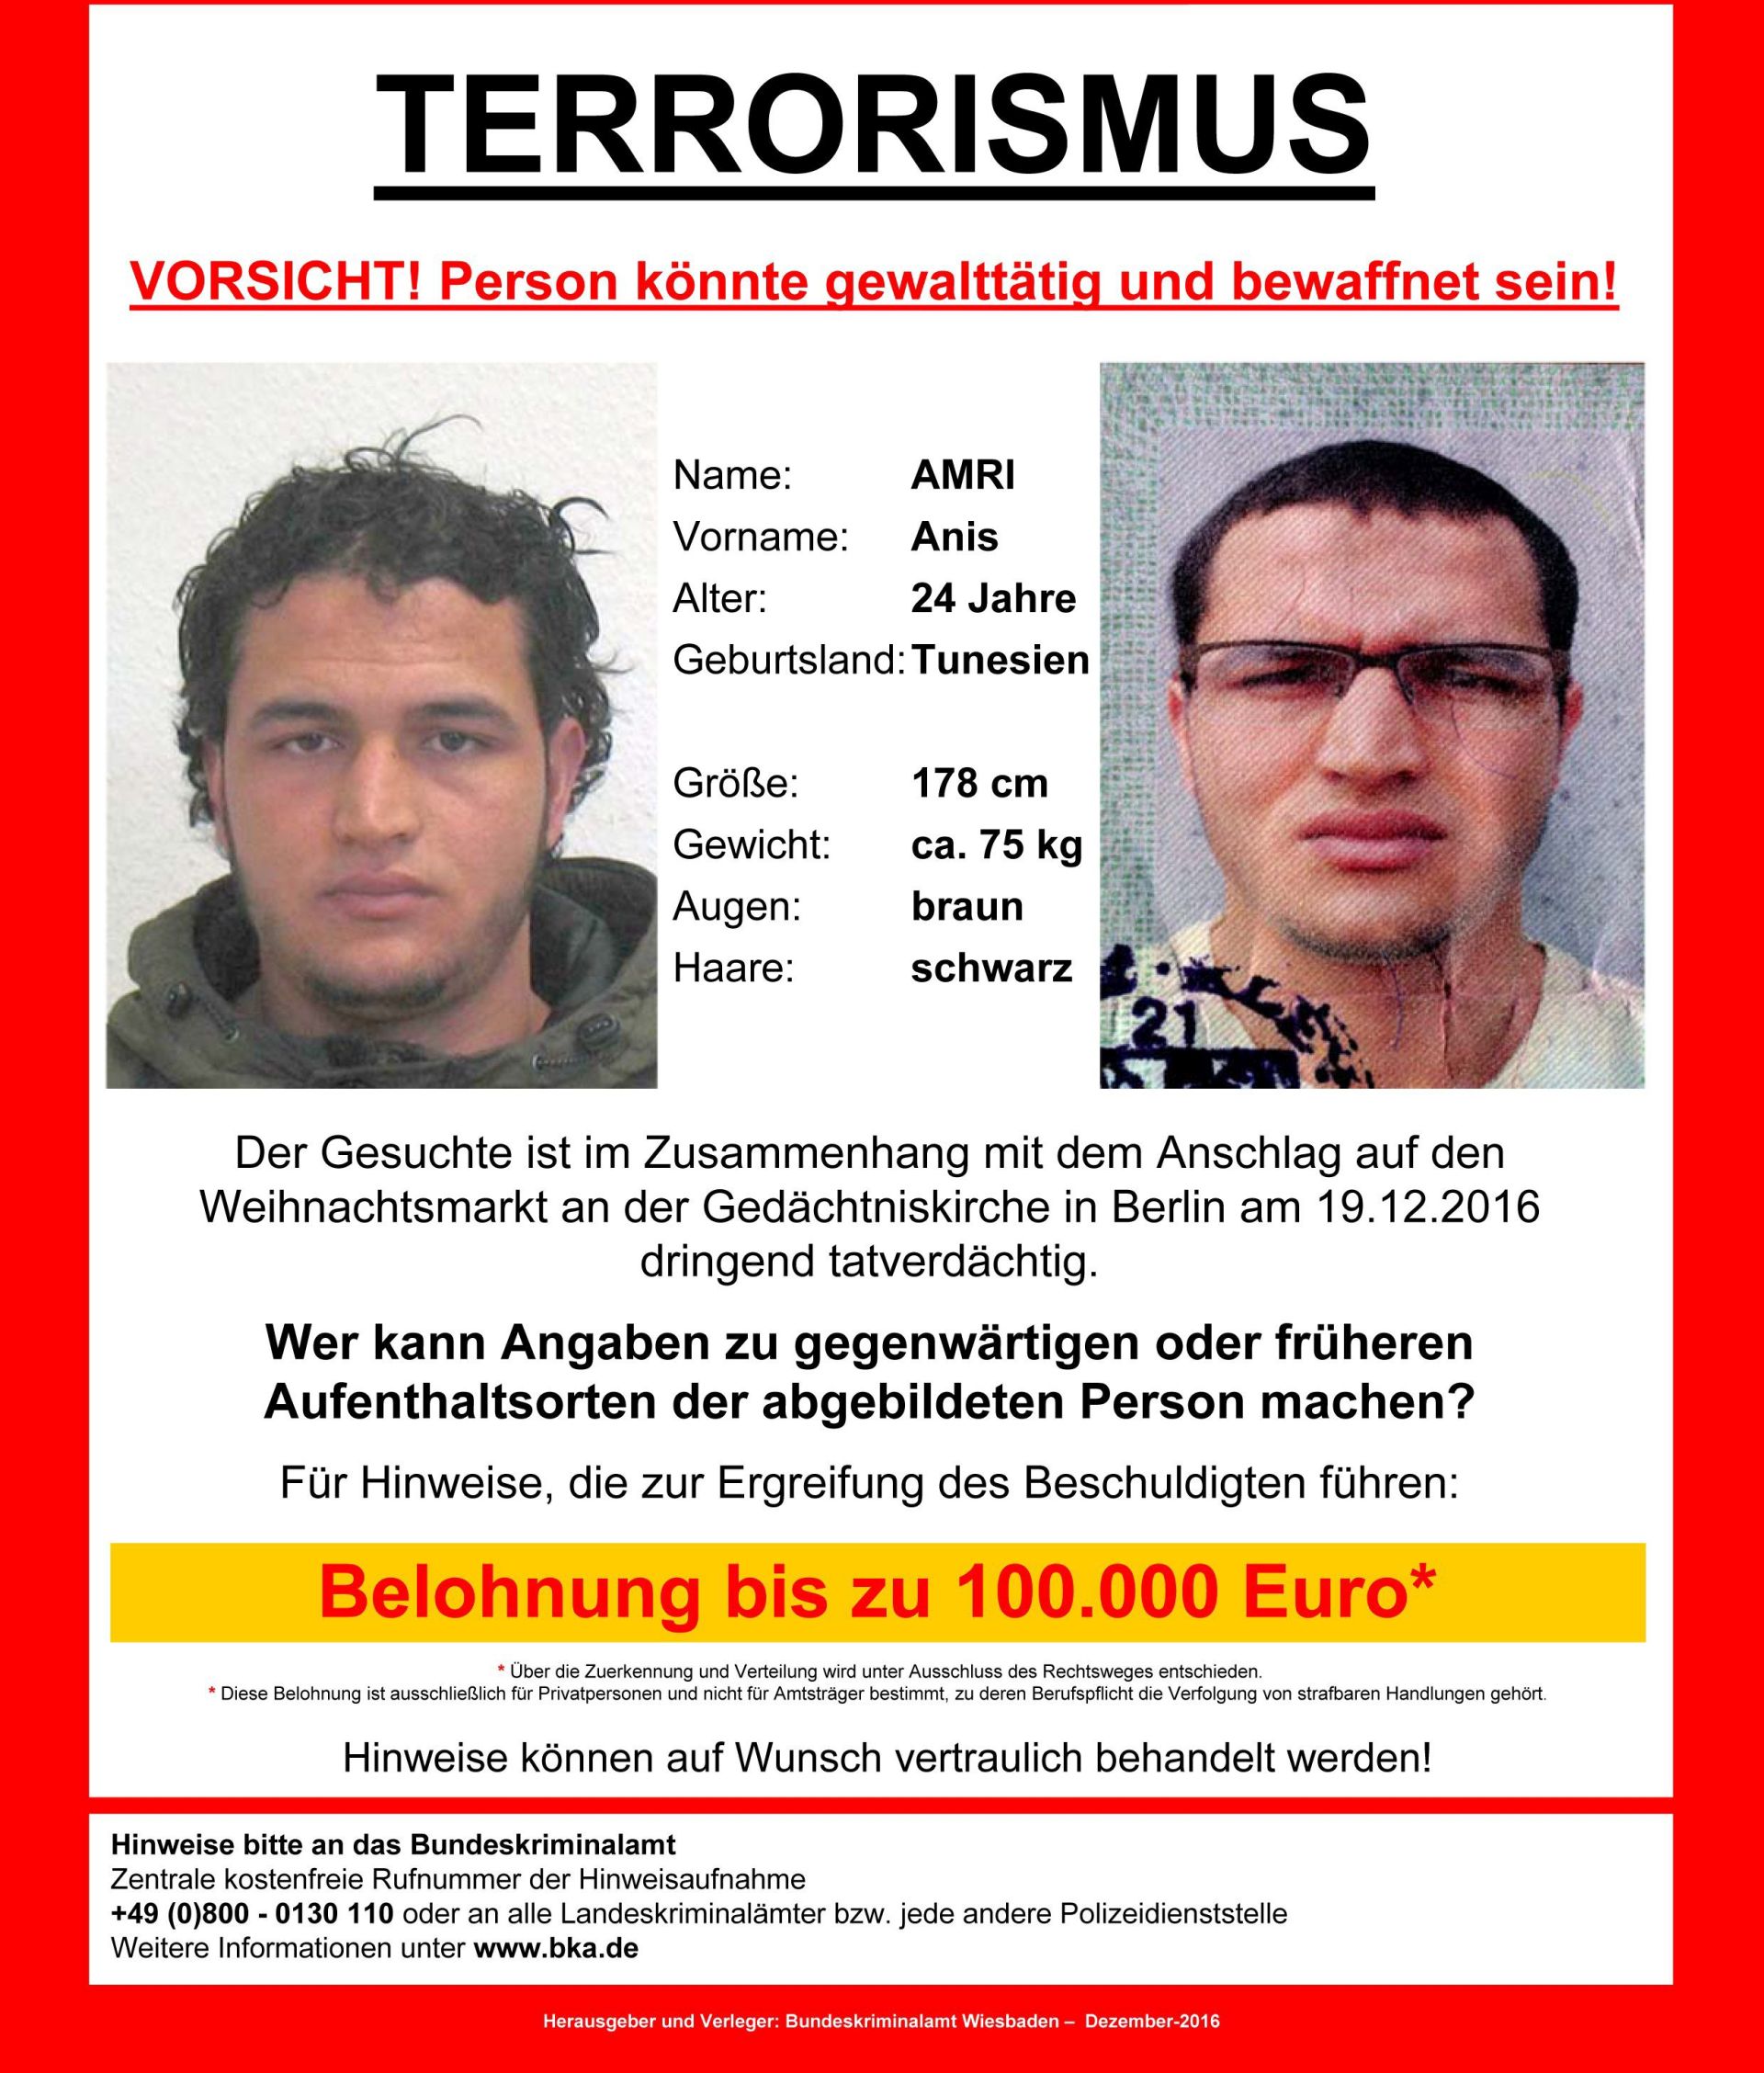 epa05684706 An undated handout photo made available by German Federal Criminal Police Office (BKA) on 21 December 2016 shows the wanted note for suspect Anis Amri who is searched for in connection to the 19 December Berlin attacks. A manhunt for the truck driver is underway after an initial suspect had to be released after he was cleared of the suspicion. At least 12 people were killed and dozens injured when a truck on 19 December drove into the Christmas market at Breitscheidplatz in Berlin, in what authorities believe was a deliberate attack.  EPA/BKA / HANDOUT BEST QUALITY AVAILABLE, MANDATORY CREDIT HANDOUT EDITORIAL USE ONLY/NO SALES